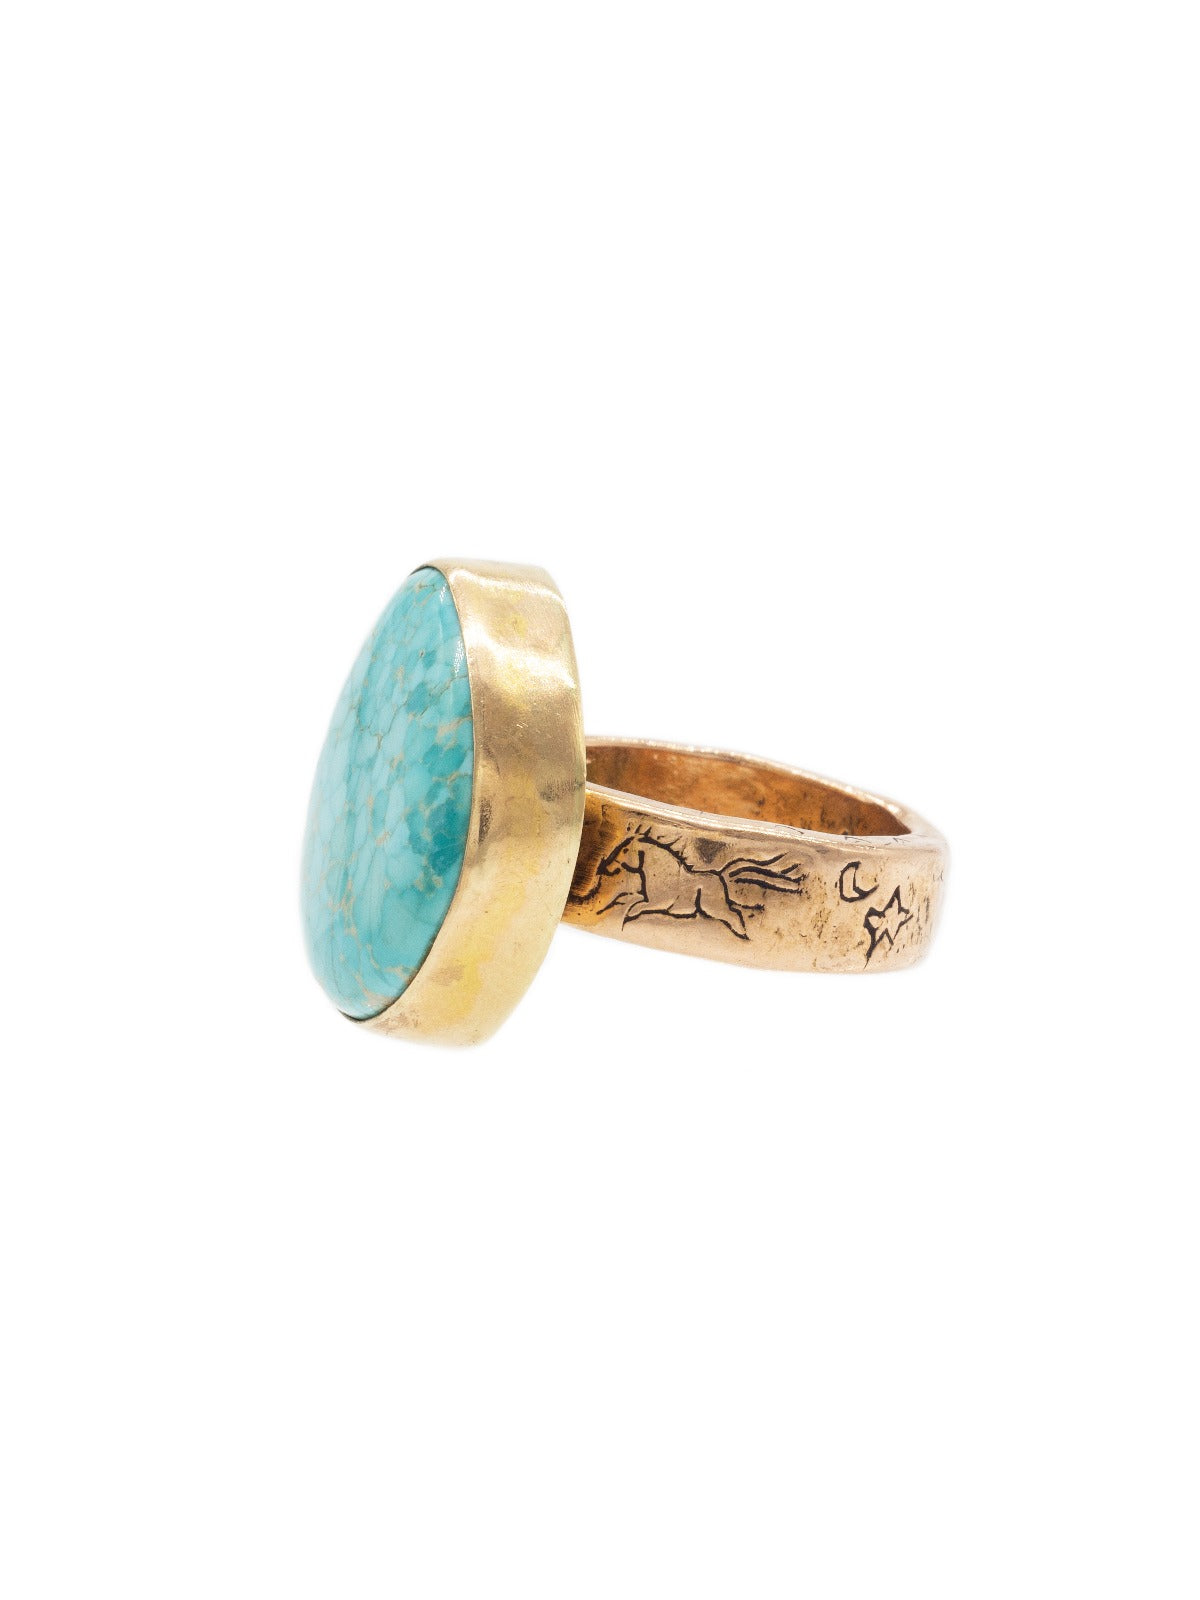 Turquoise Tranquility Ring